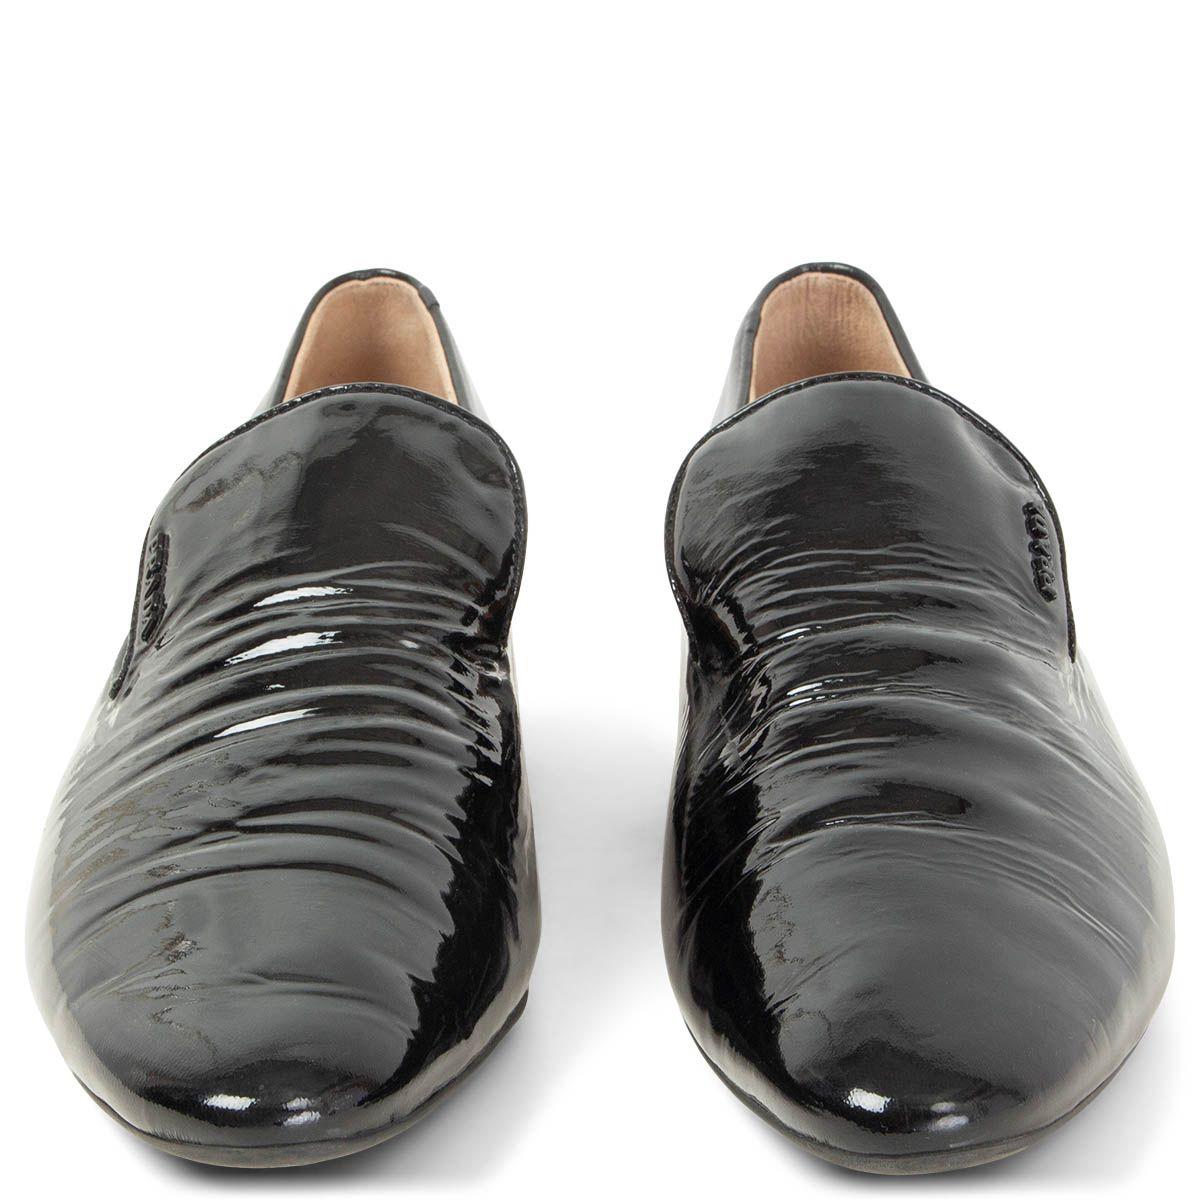 100% authentic Prada almond-toe black patent leather loafers. Have been worn once and show some creasing. Overall in excellent condition. 

Measurements
Imprinted Size	39.5
Shoe Size	39.5
Inside Sole	26.5cm (10.3in)
Width	7.5cm (2.9in)
Heel	2.5cm